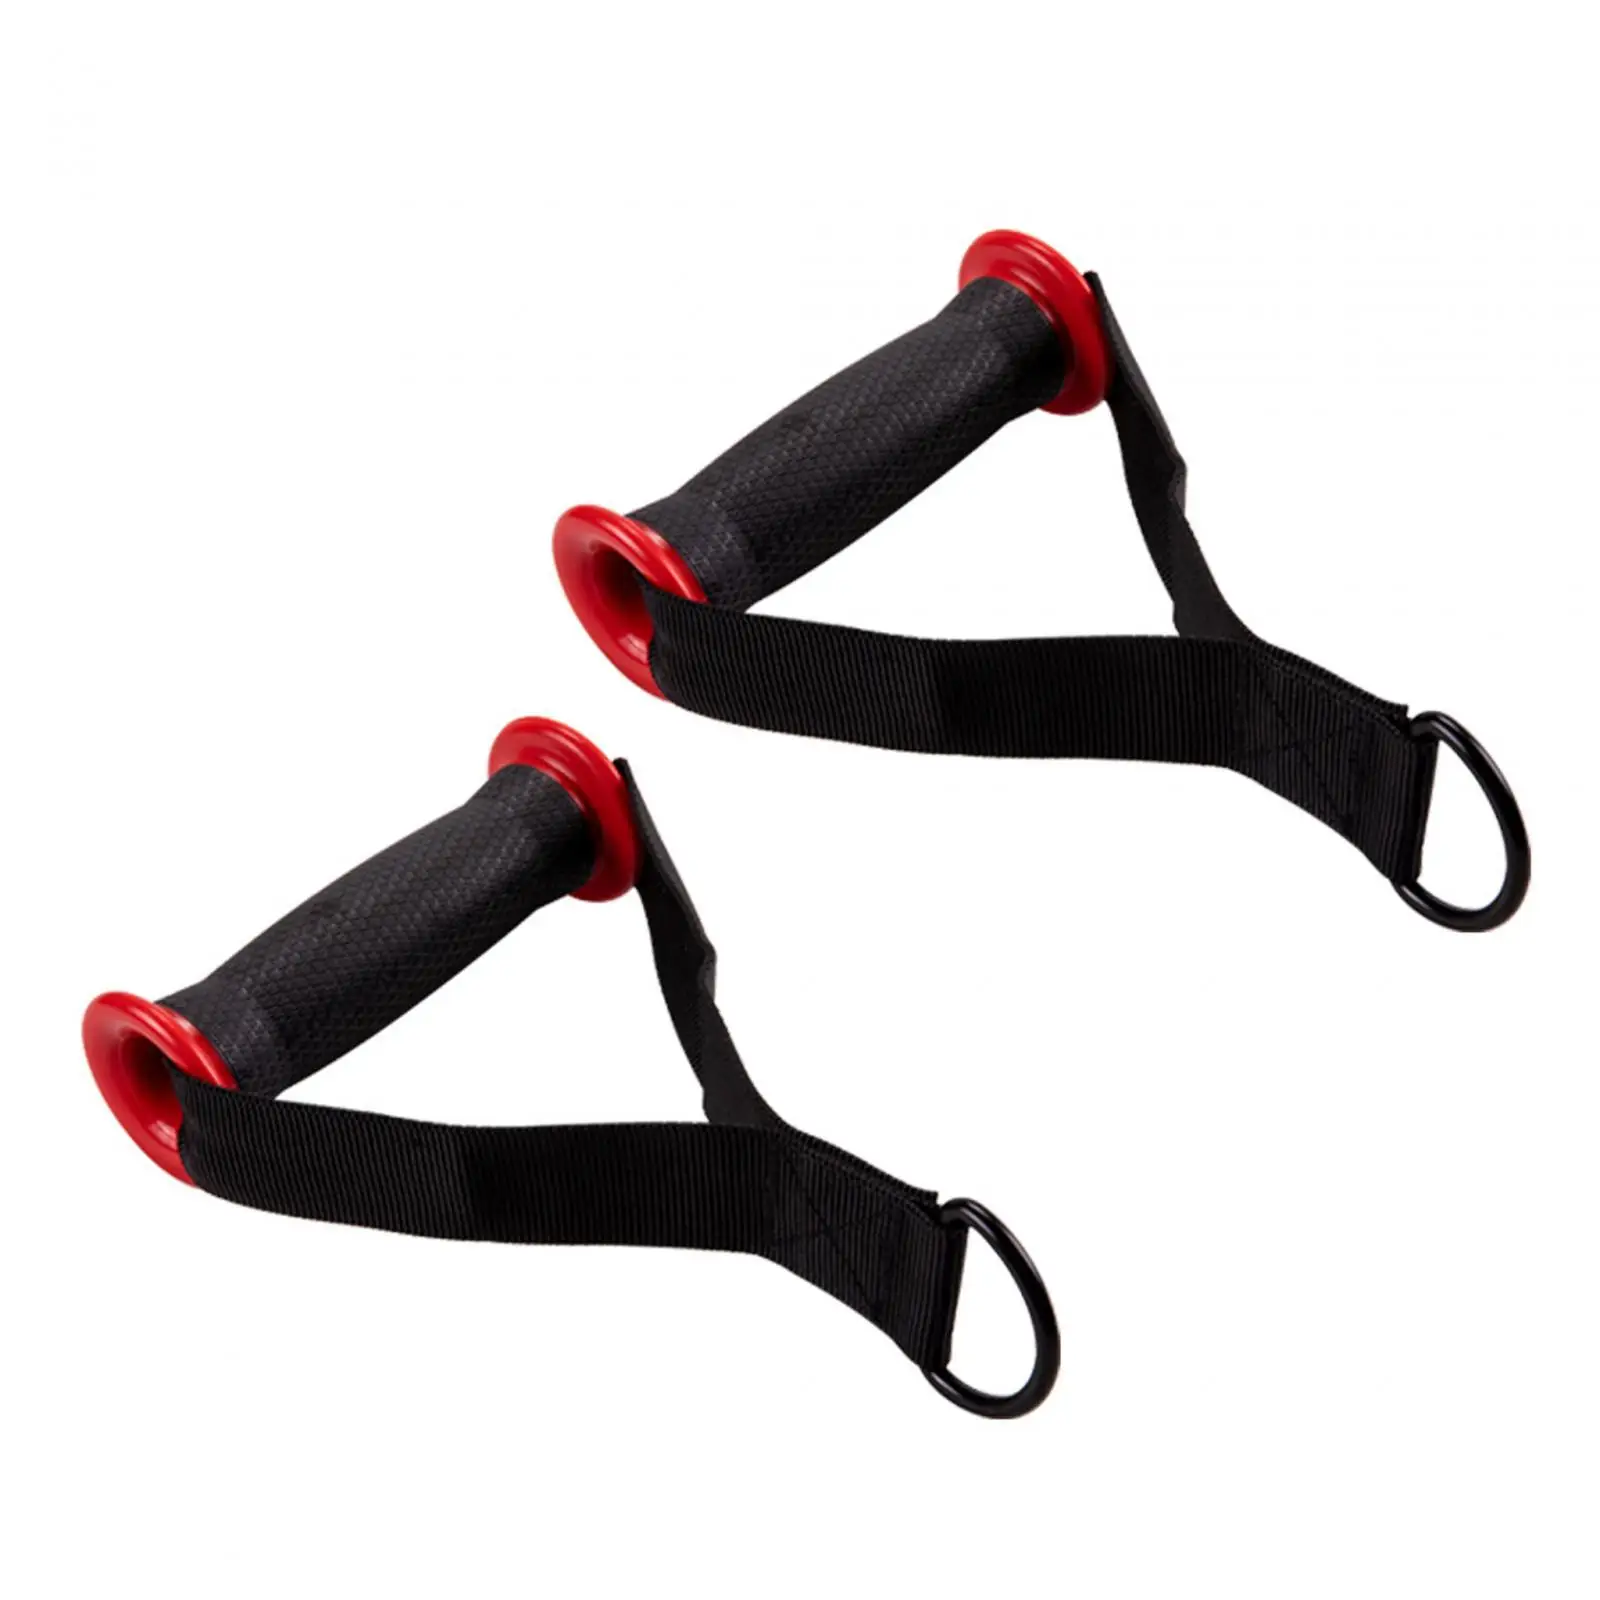 2x Cable Machine Attachment Handles Replacement Grips Workout Gymnastics Hanging Resistance Exercise Strength Pull Handles